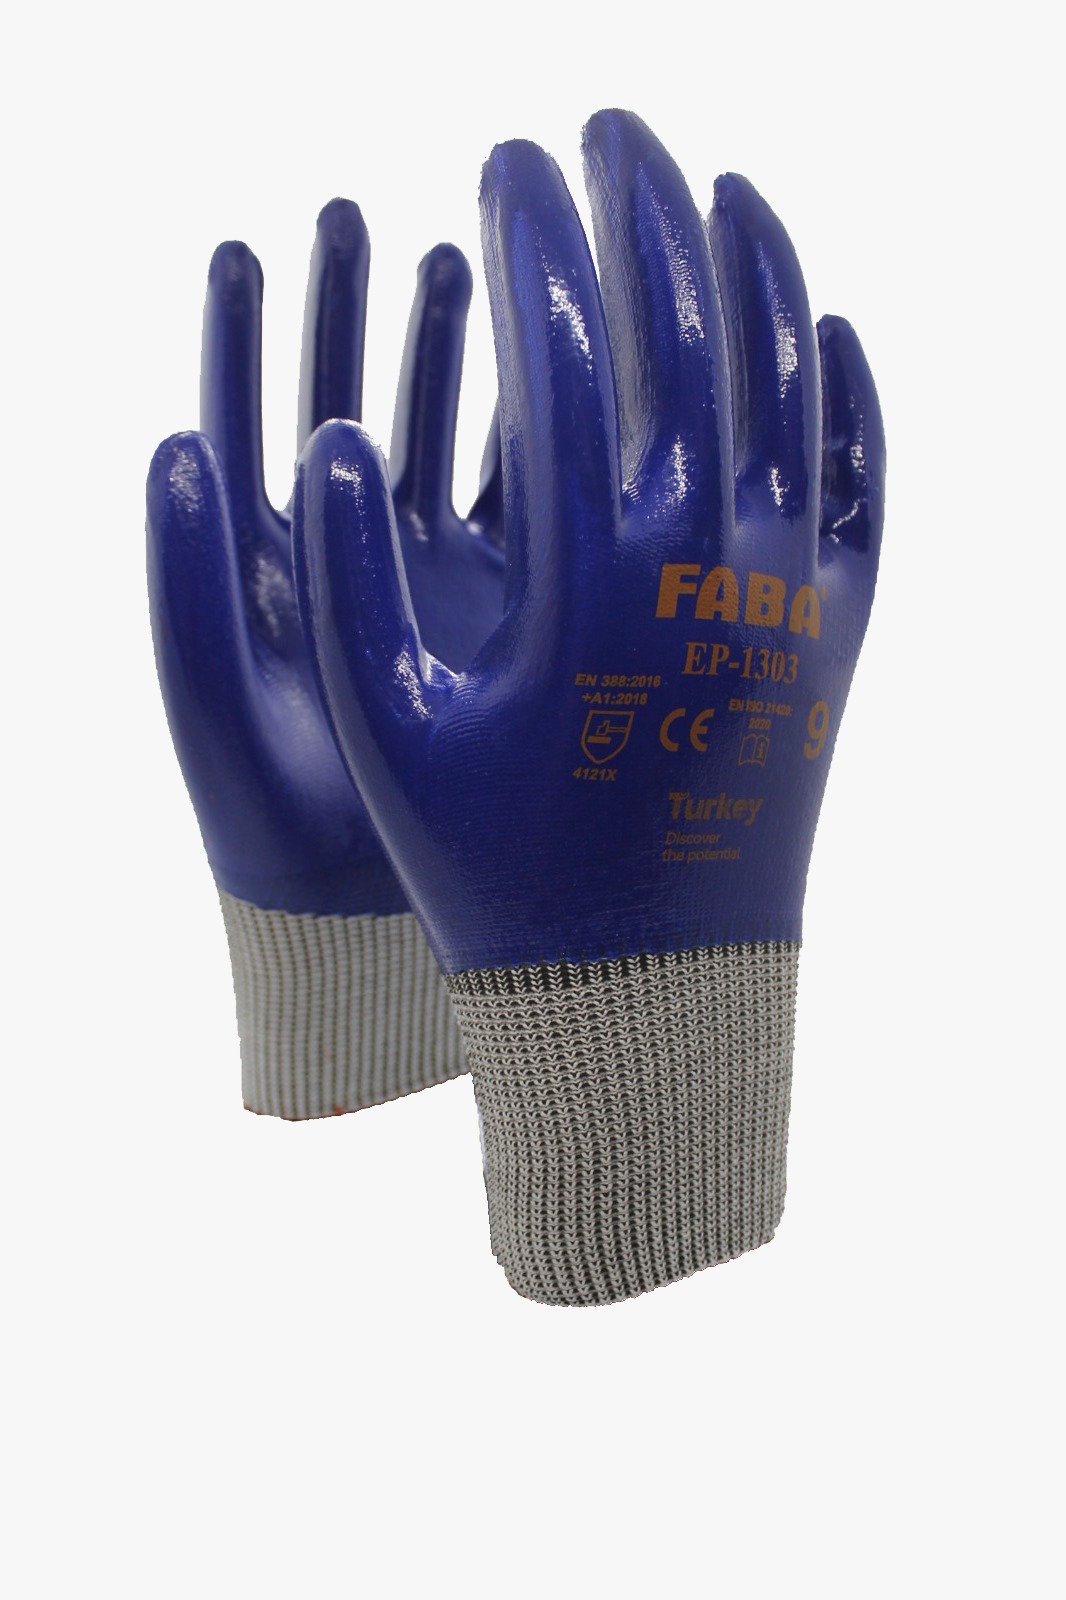 THECNICAL GLOVES